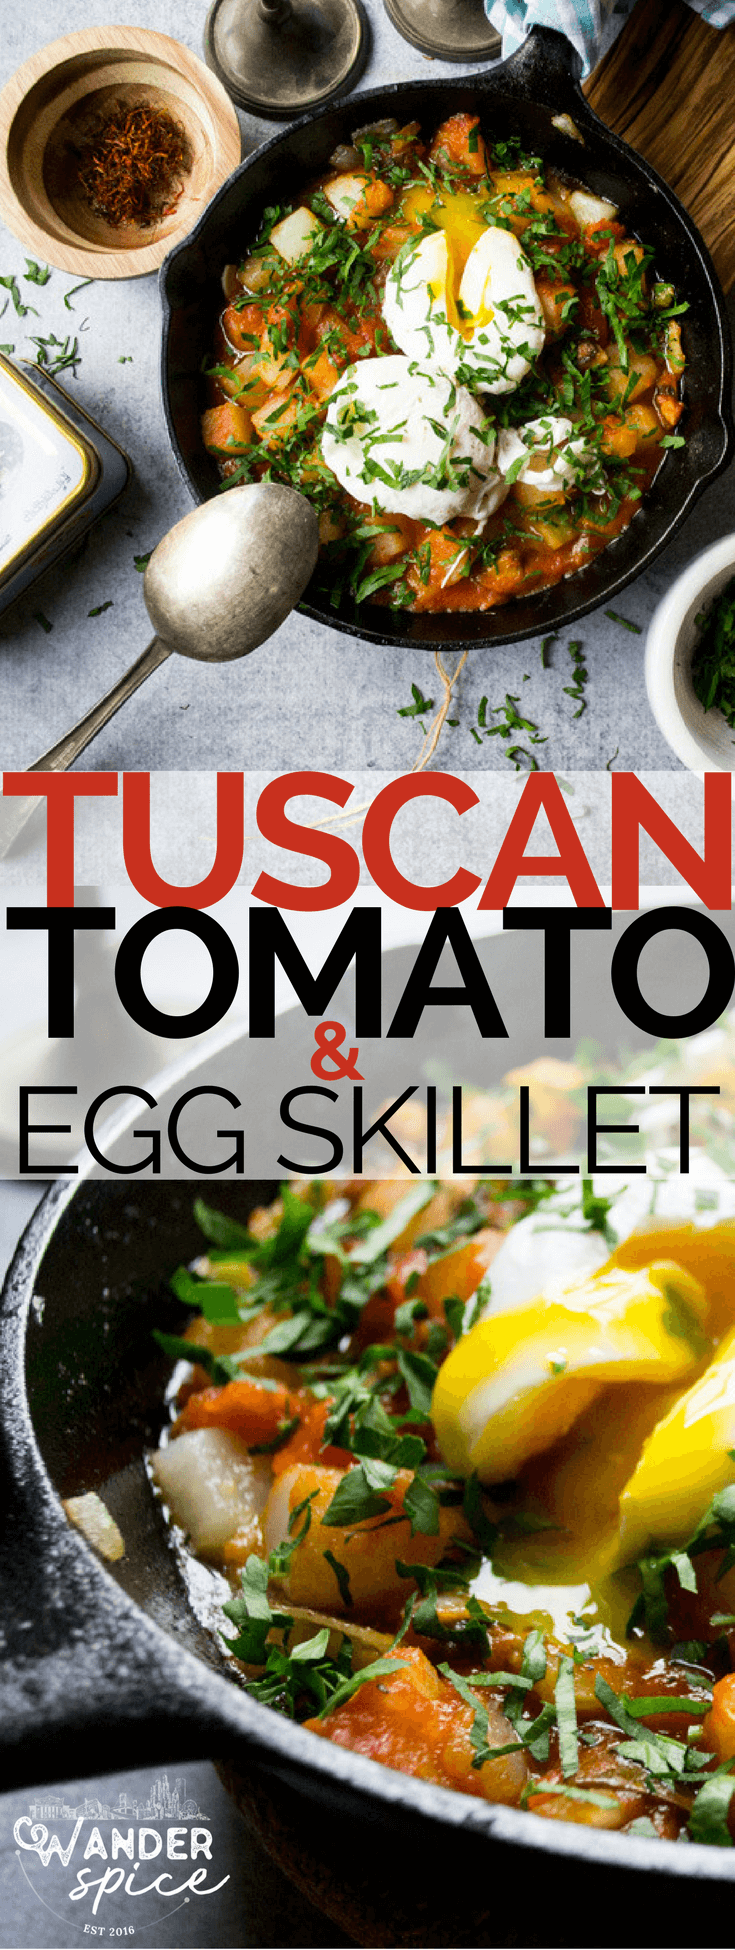 Tuscan Tomato Egg Skillet, a hearty, Italian way to start the morning